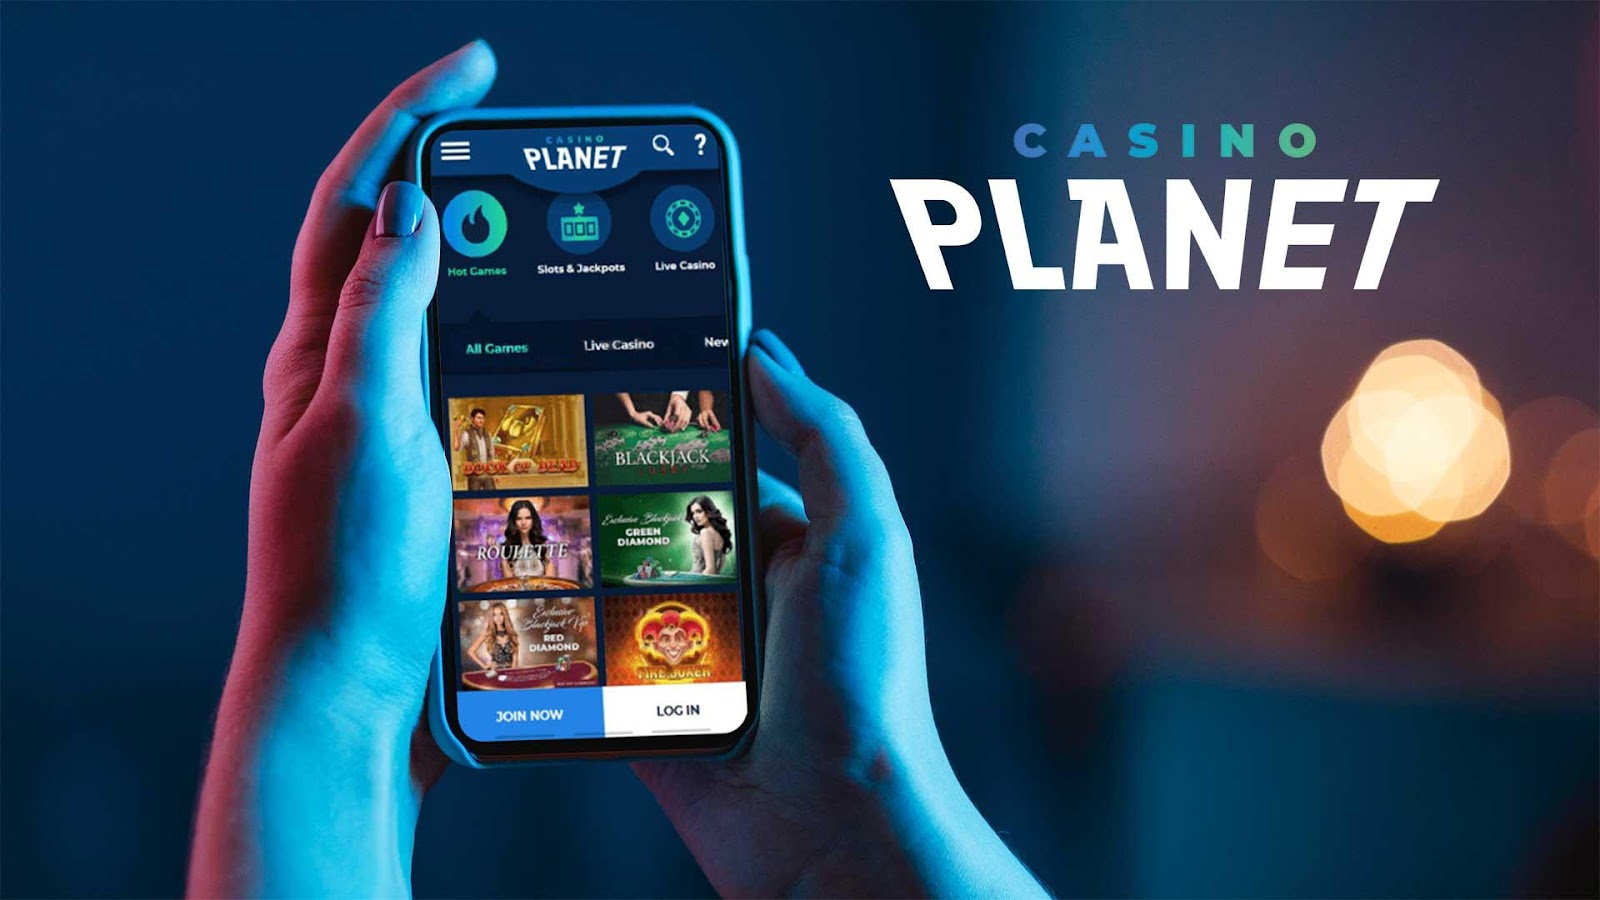 Casino Planet Mobile App - Download, Install & PLAY